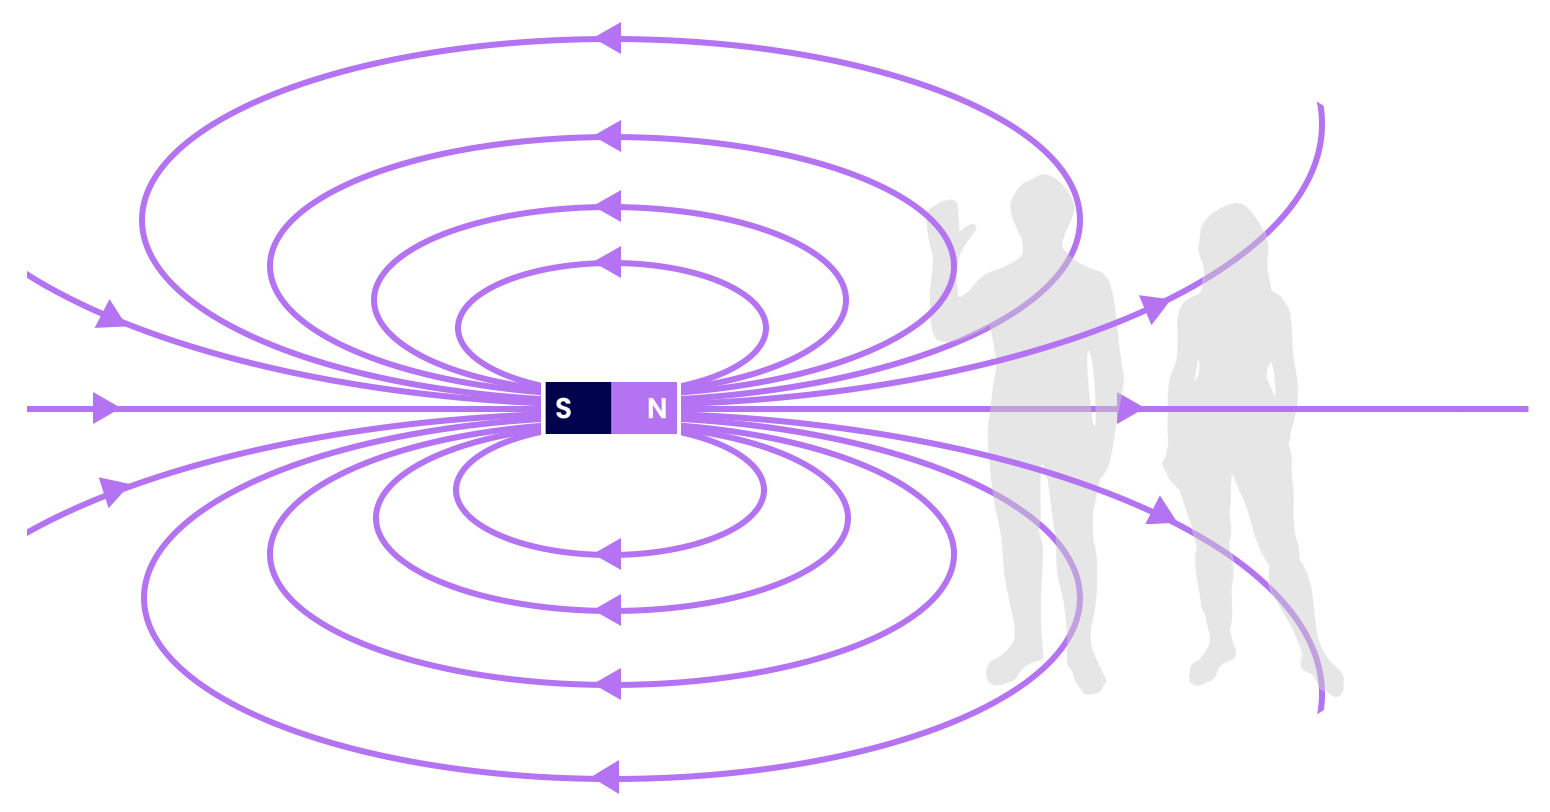 Magnetic field passing through people